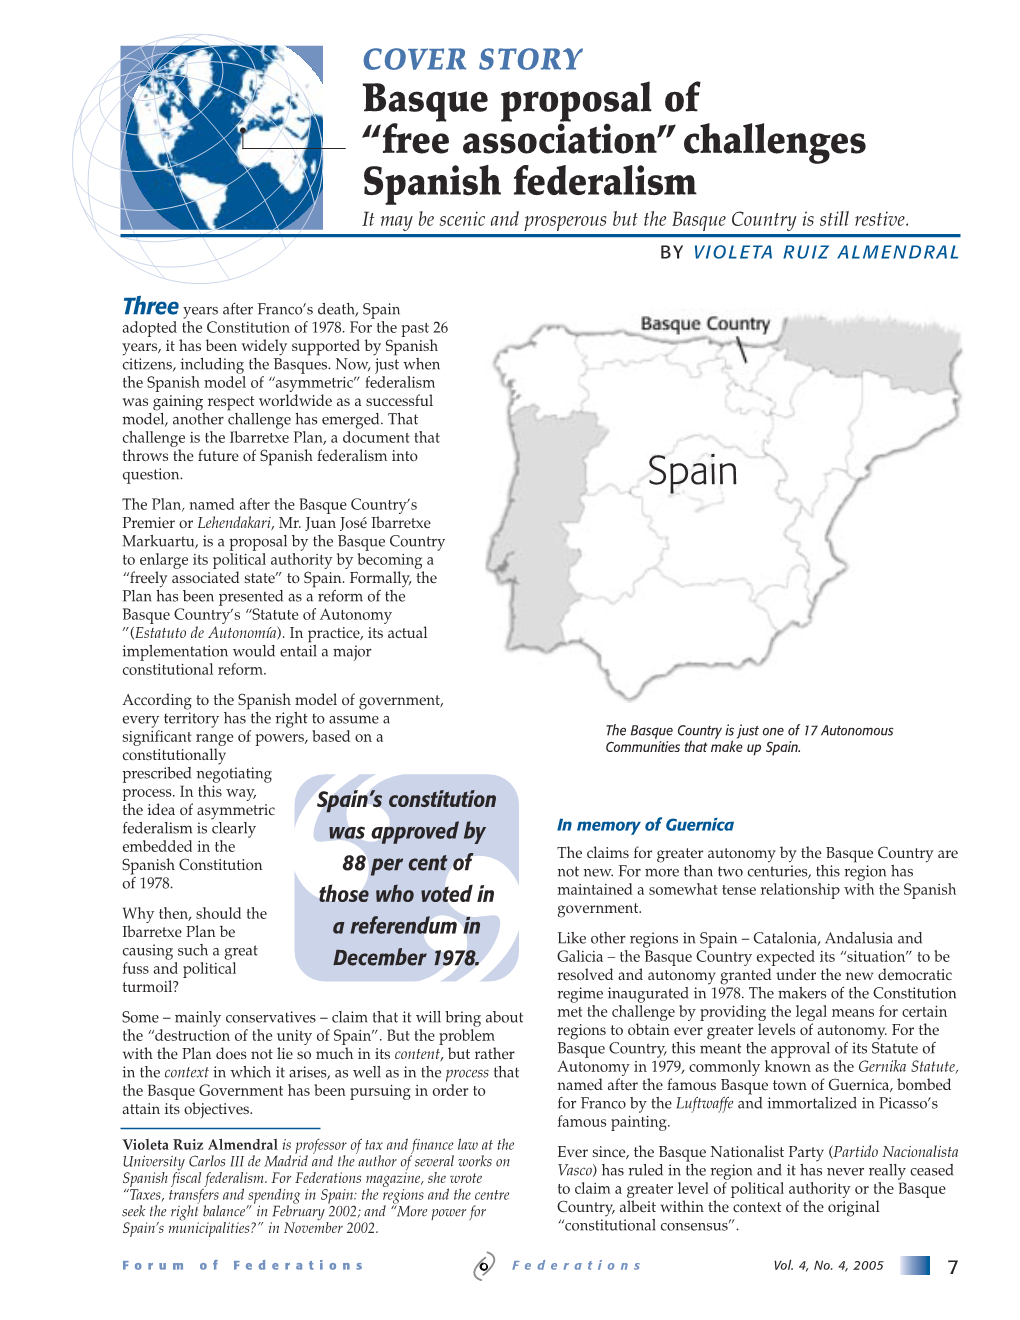 Basque Proposal of Free Association Challenges Spanish Federalism